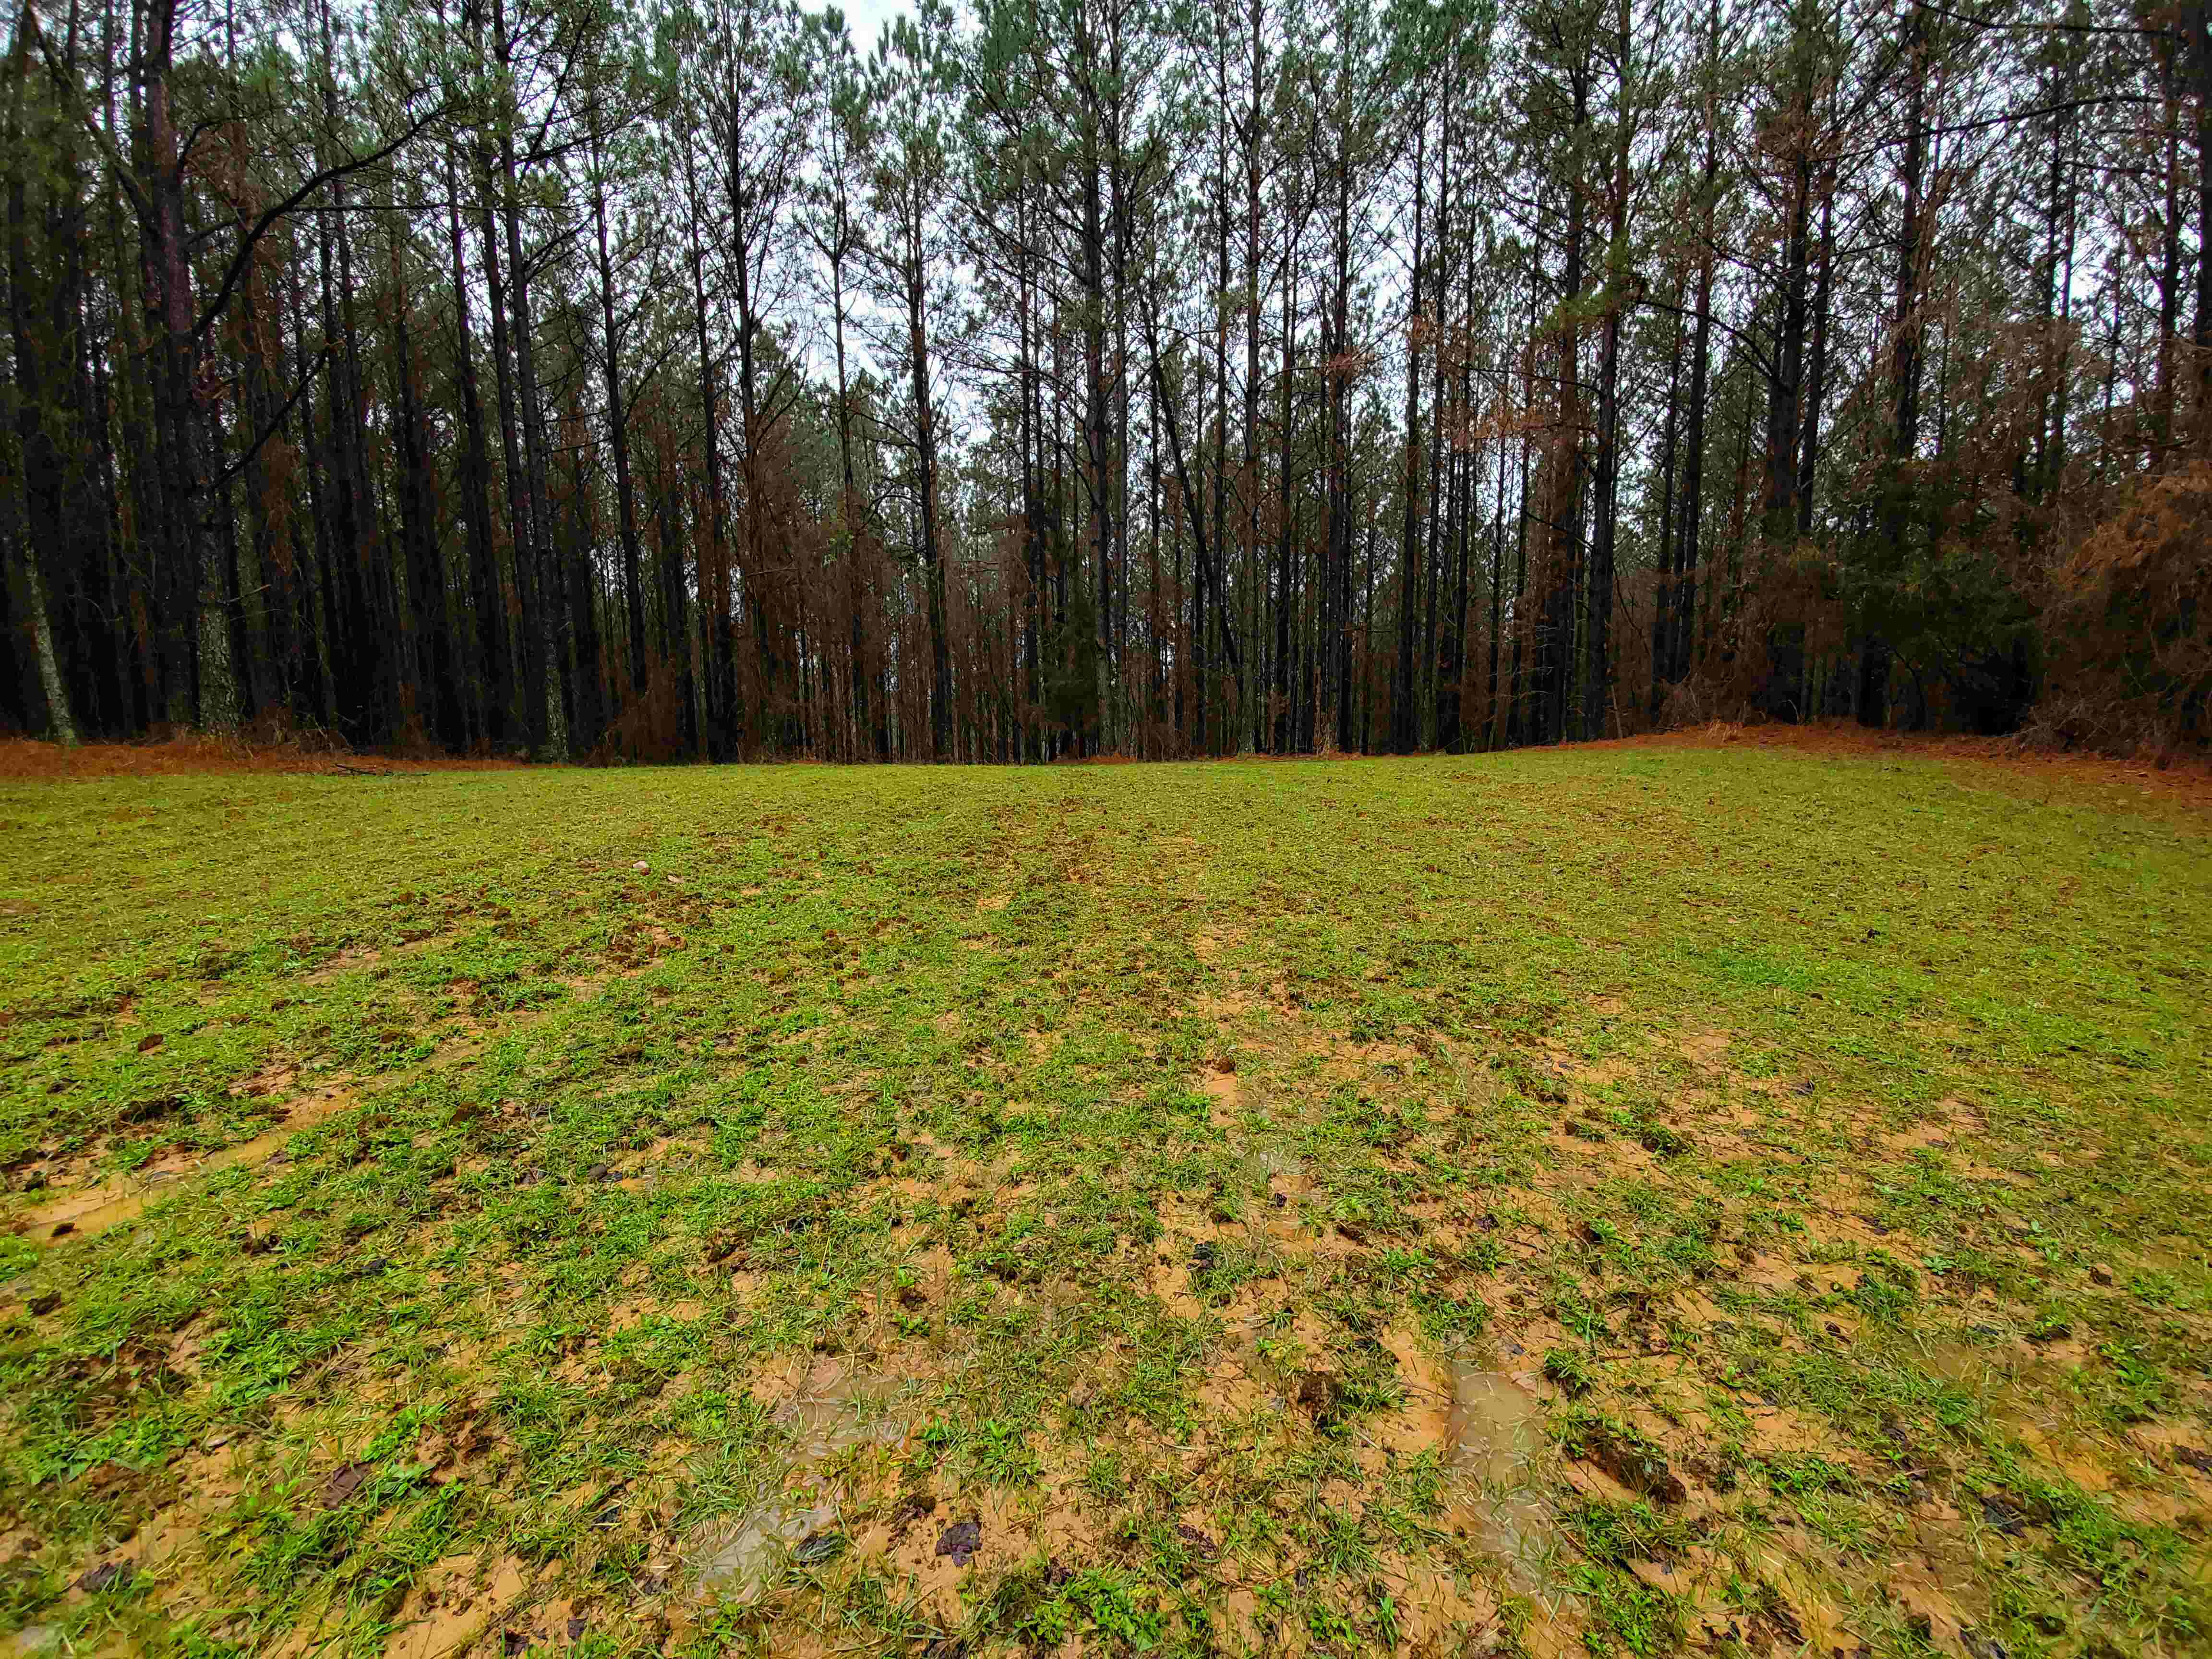 Another view of the food plot